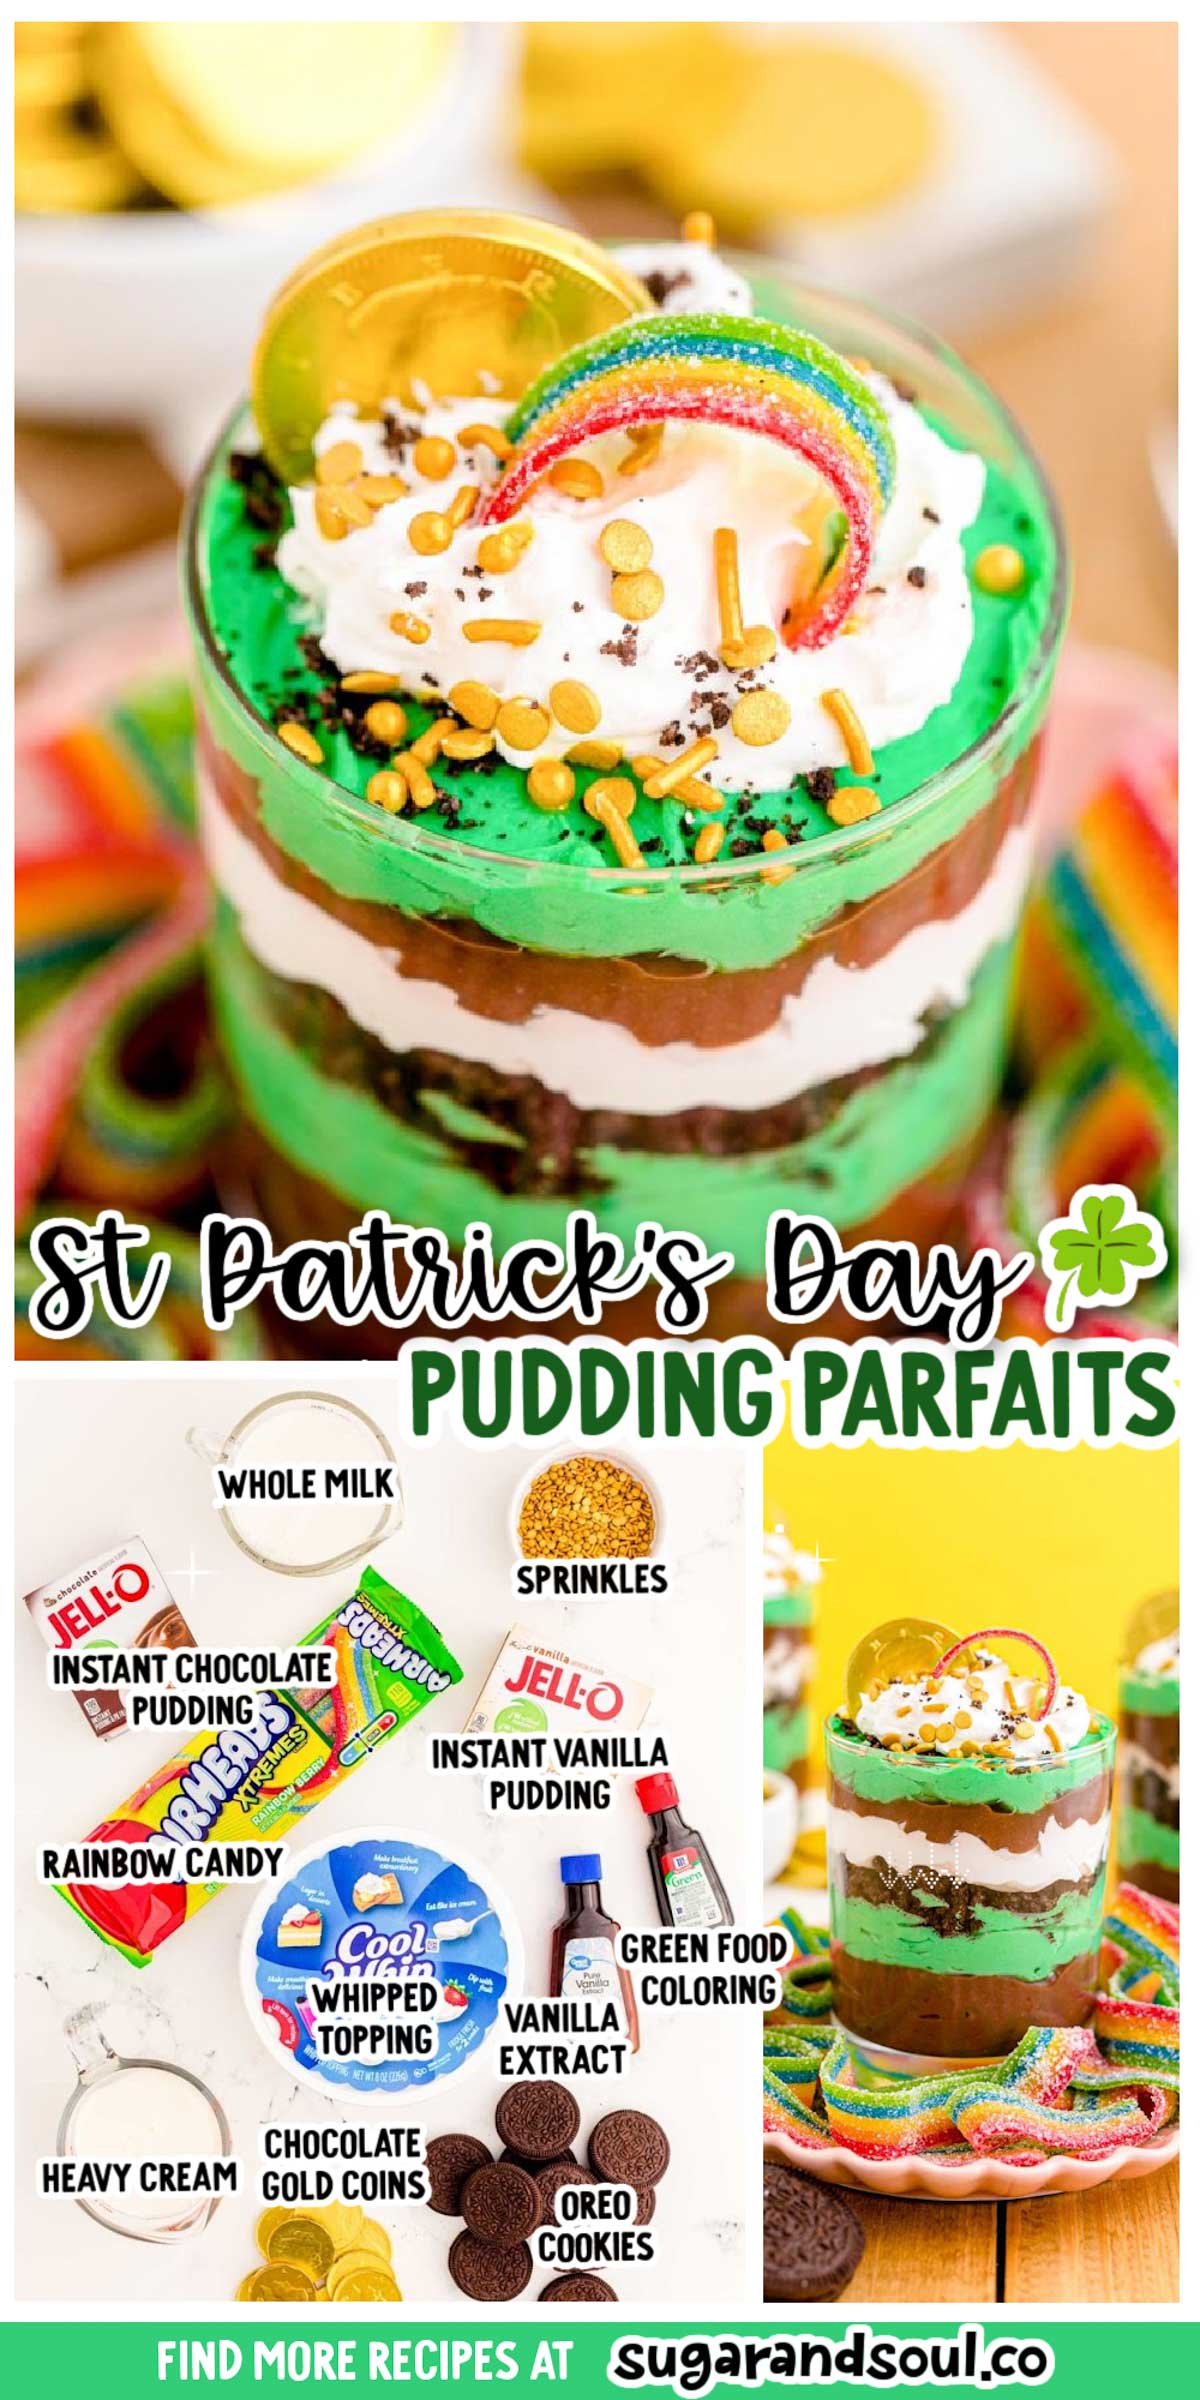 Easy St. Patrick's Day Dessert Parfaits have layers of chocolate and vanilla pudding, crunchy Oreo crumbs, and sweet whipped topping! Prep these fun dessert cups in just 30 minutes!  via @sugarandsoulco